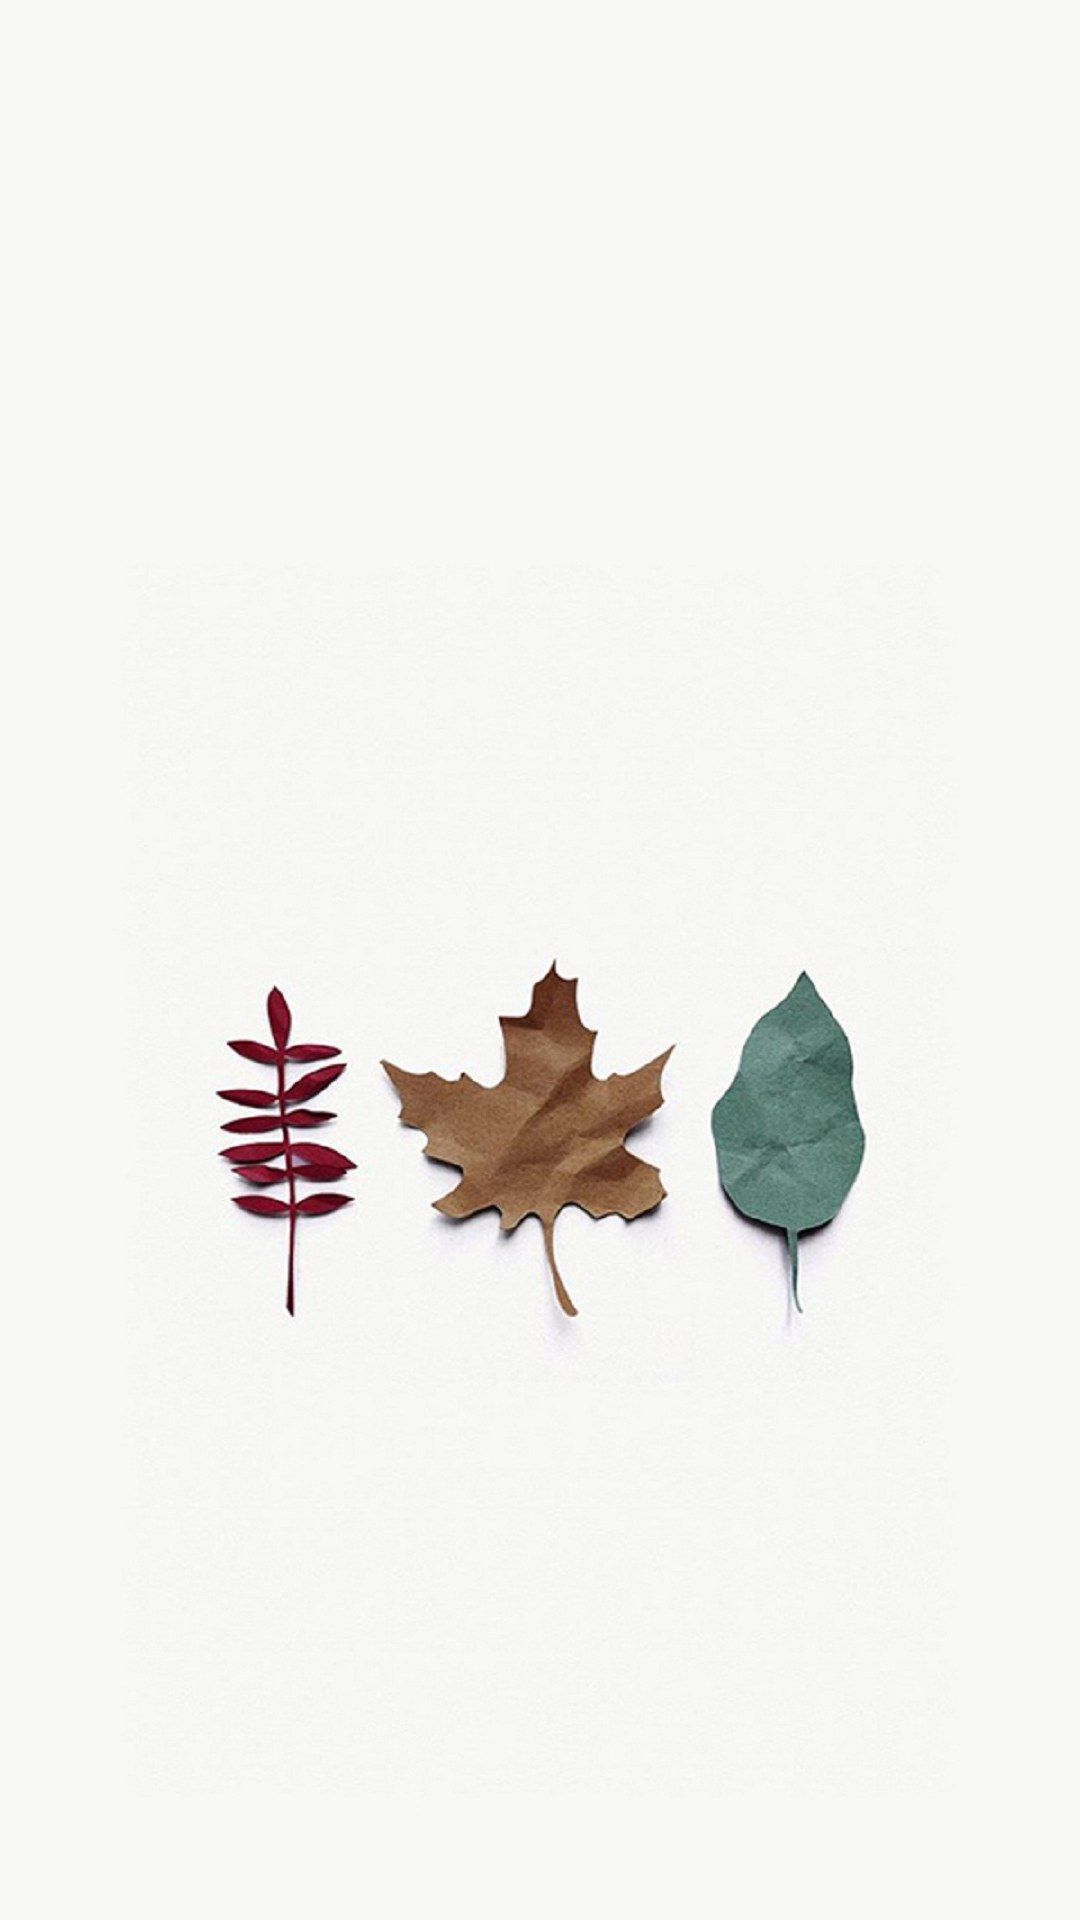 Simple Fall Background